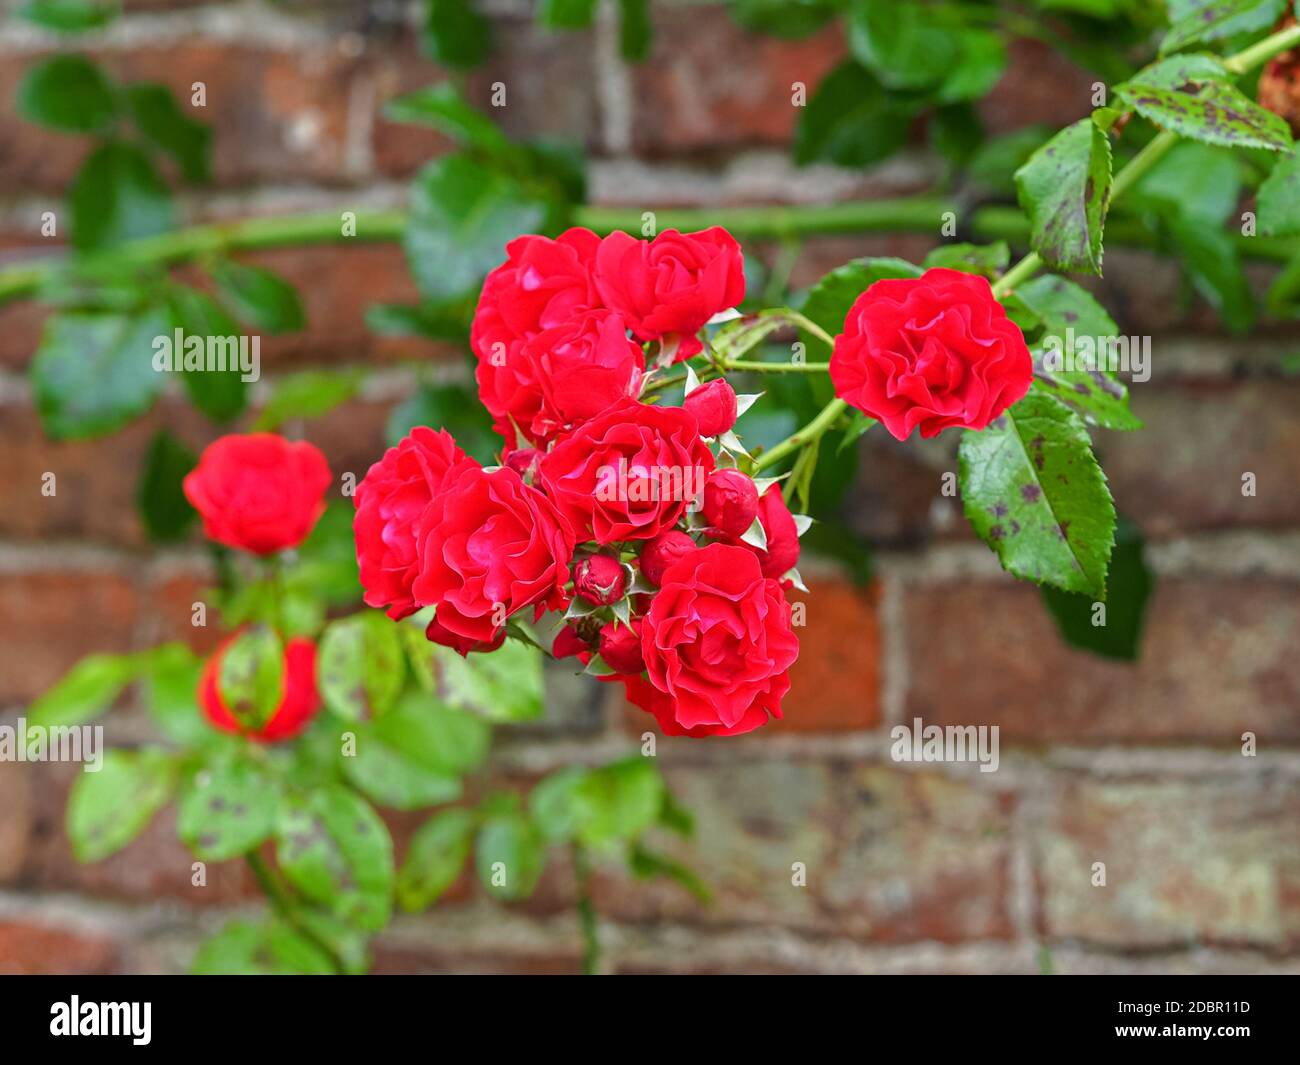 Climbing red rose blooms and green leaves against a brick wall Stock Photo